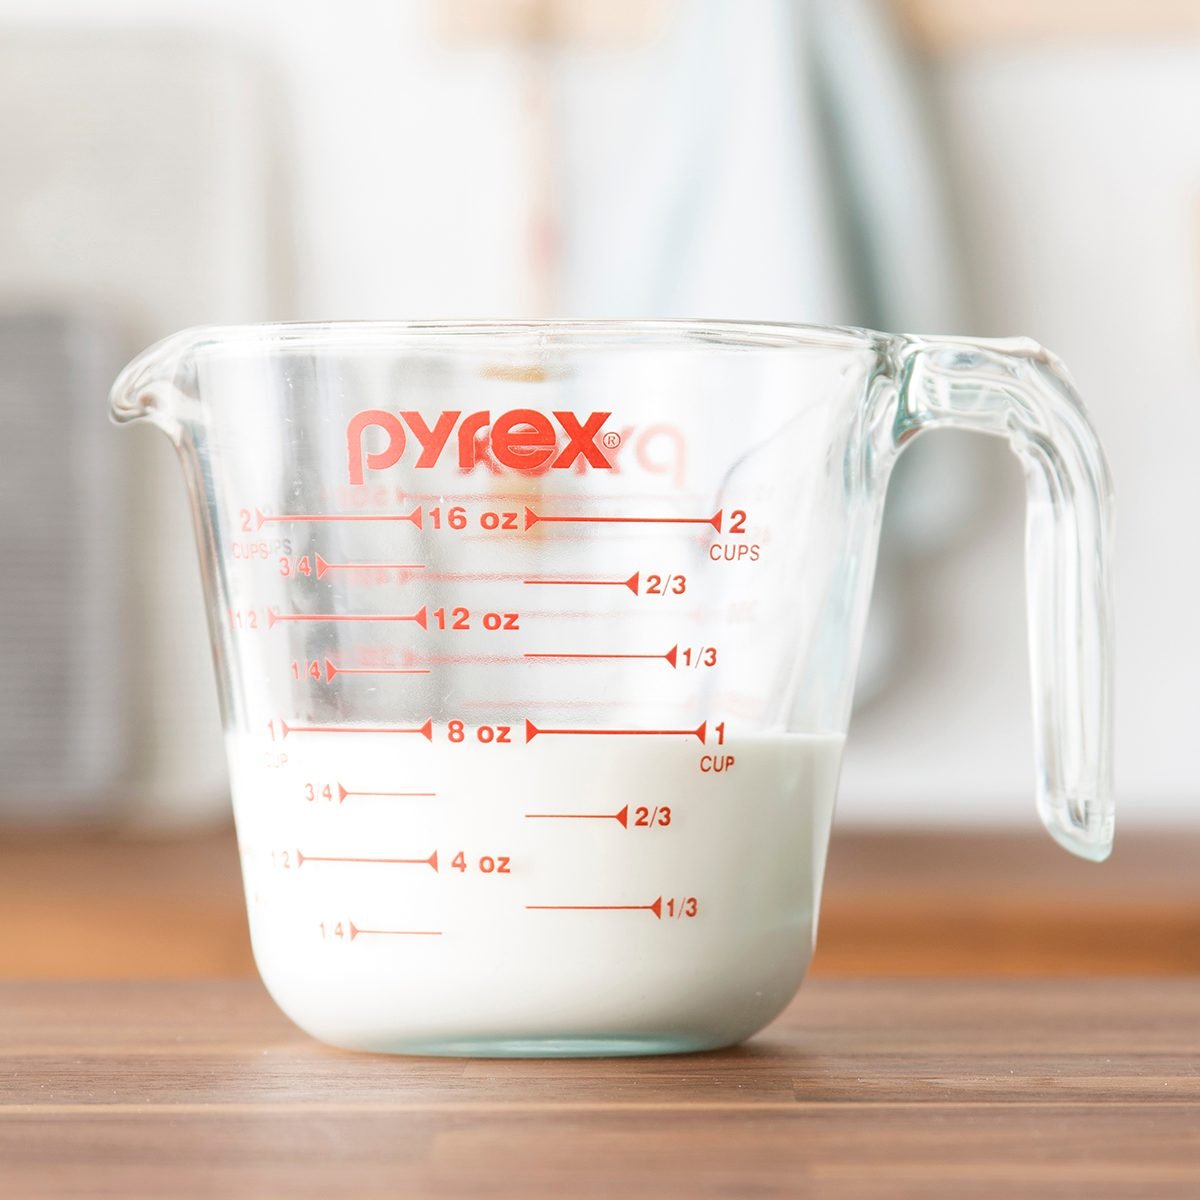 Dry vs Liquid Measuring Cups - What's The Difference? 